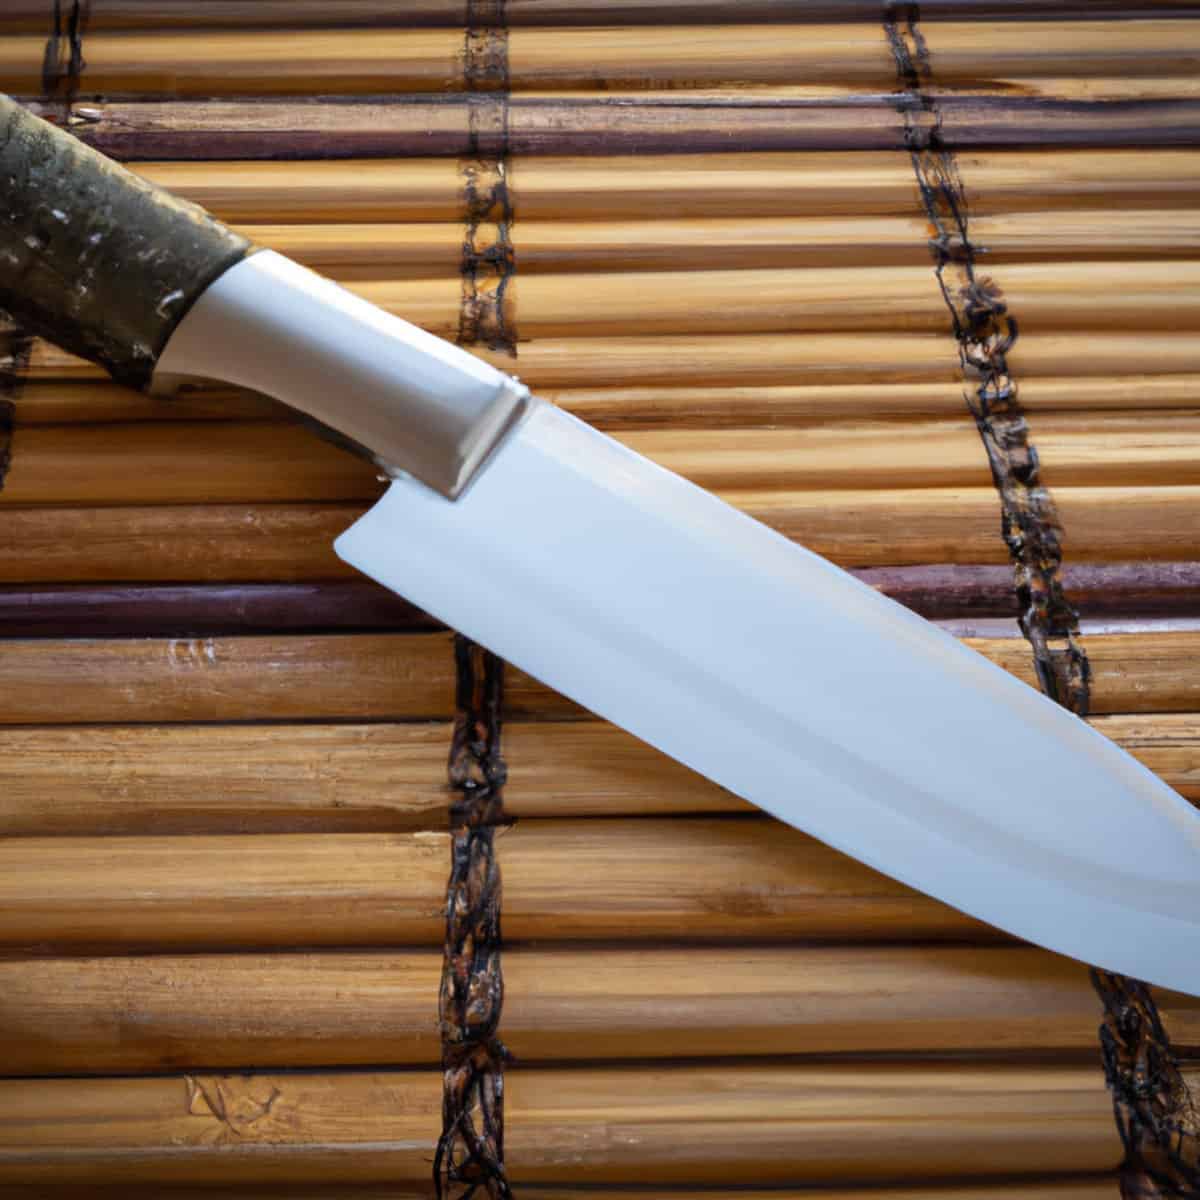 How Long Can Japanese Knives Last? More Than a Lifetime With Proper Care